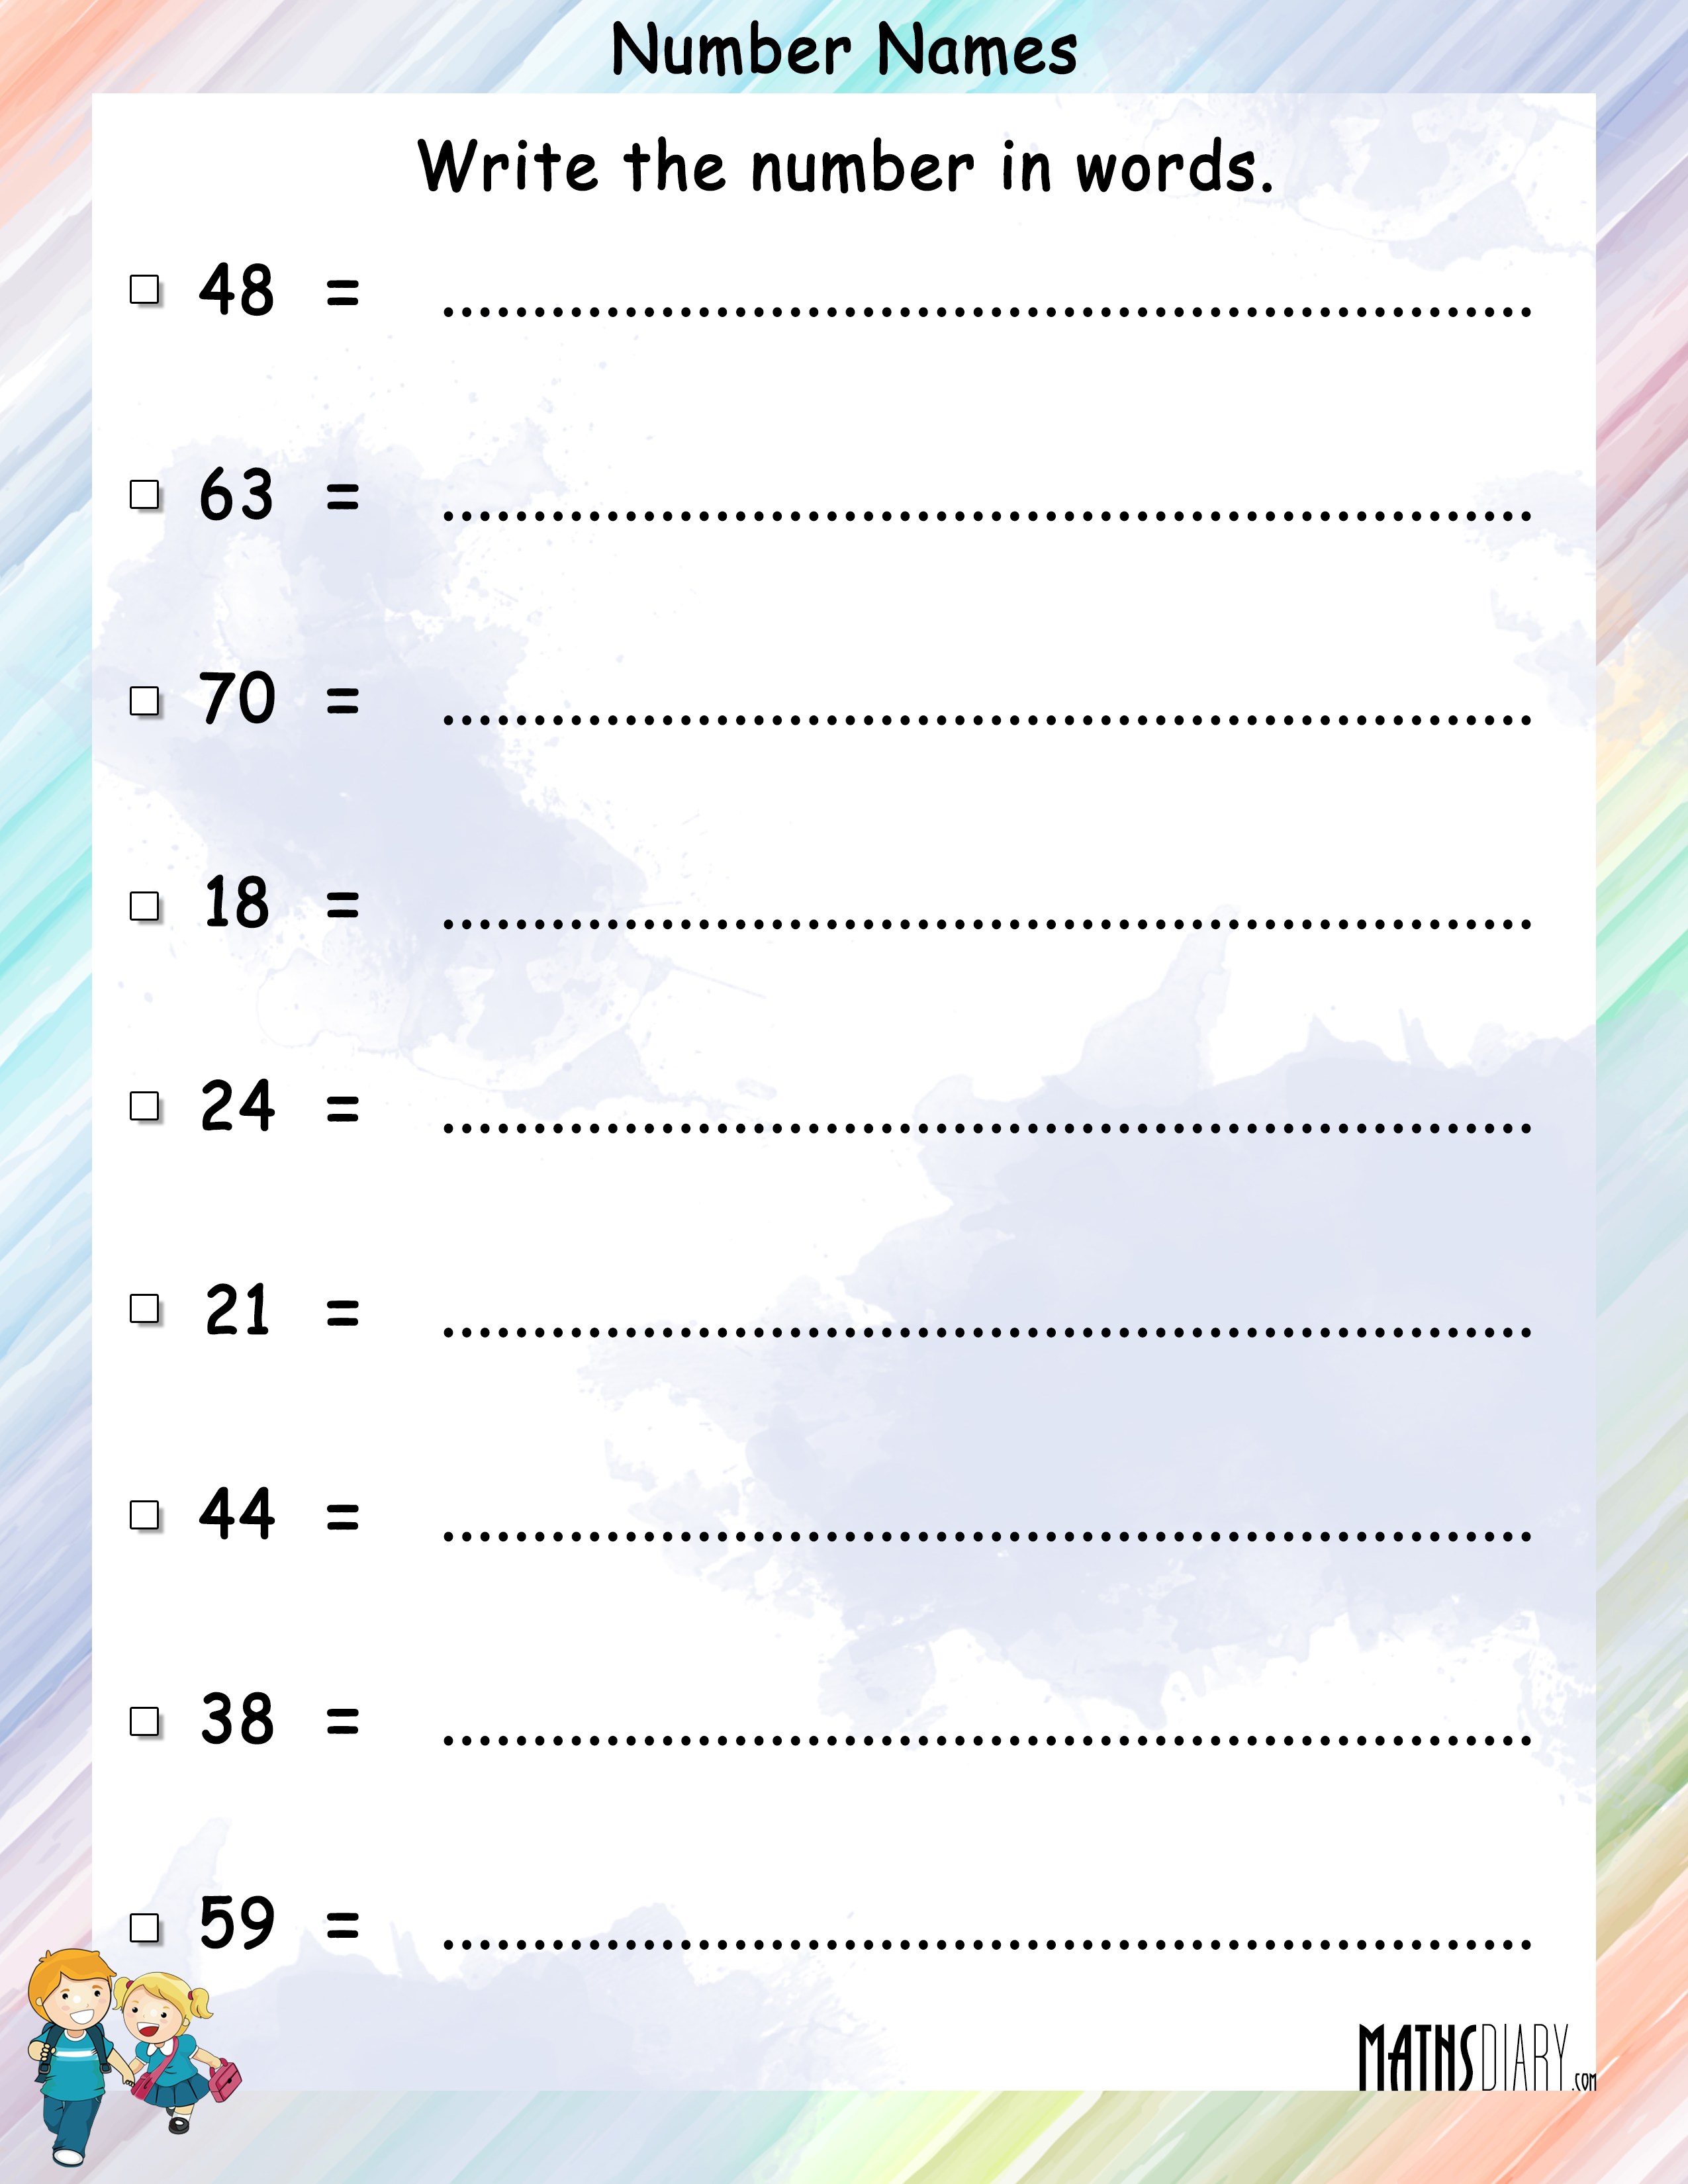 Writing Numbers Worksheet For Grade 2